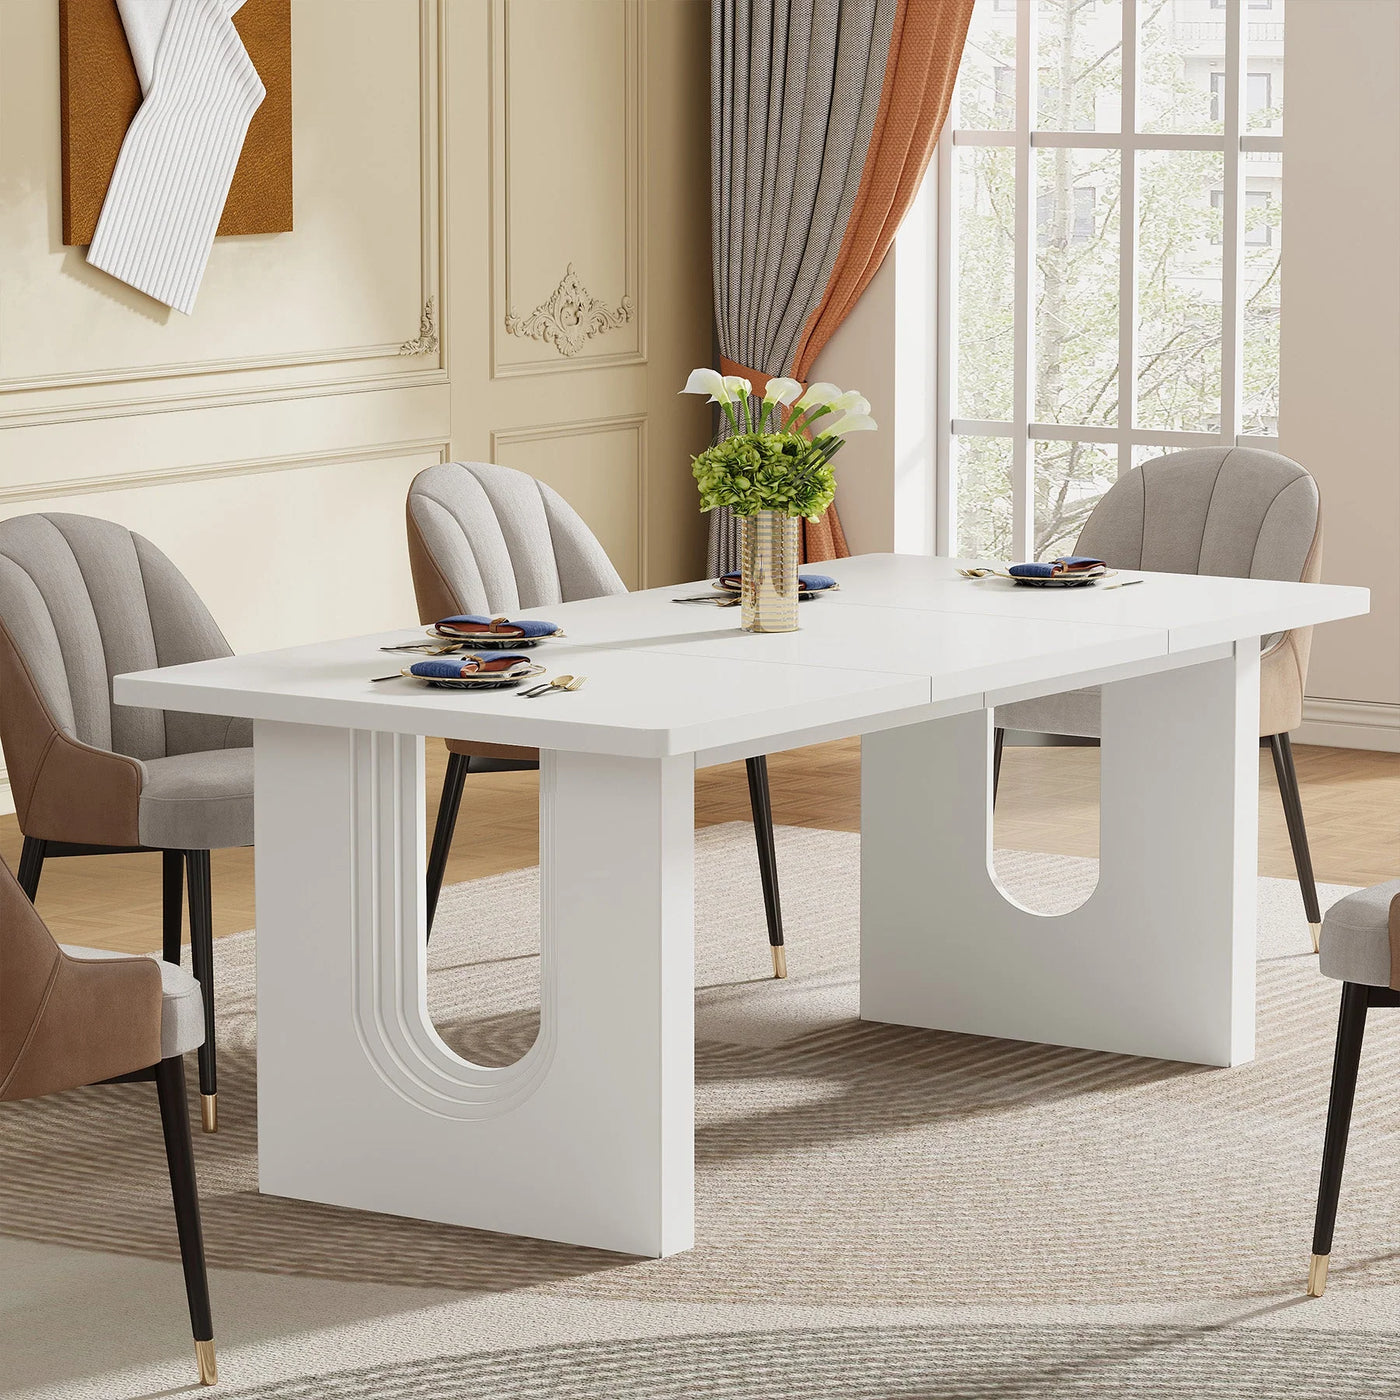 Laront 71" Dining Table for 6 to 8 People | Modern White Wood Kitchen Dinner Table